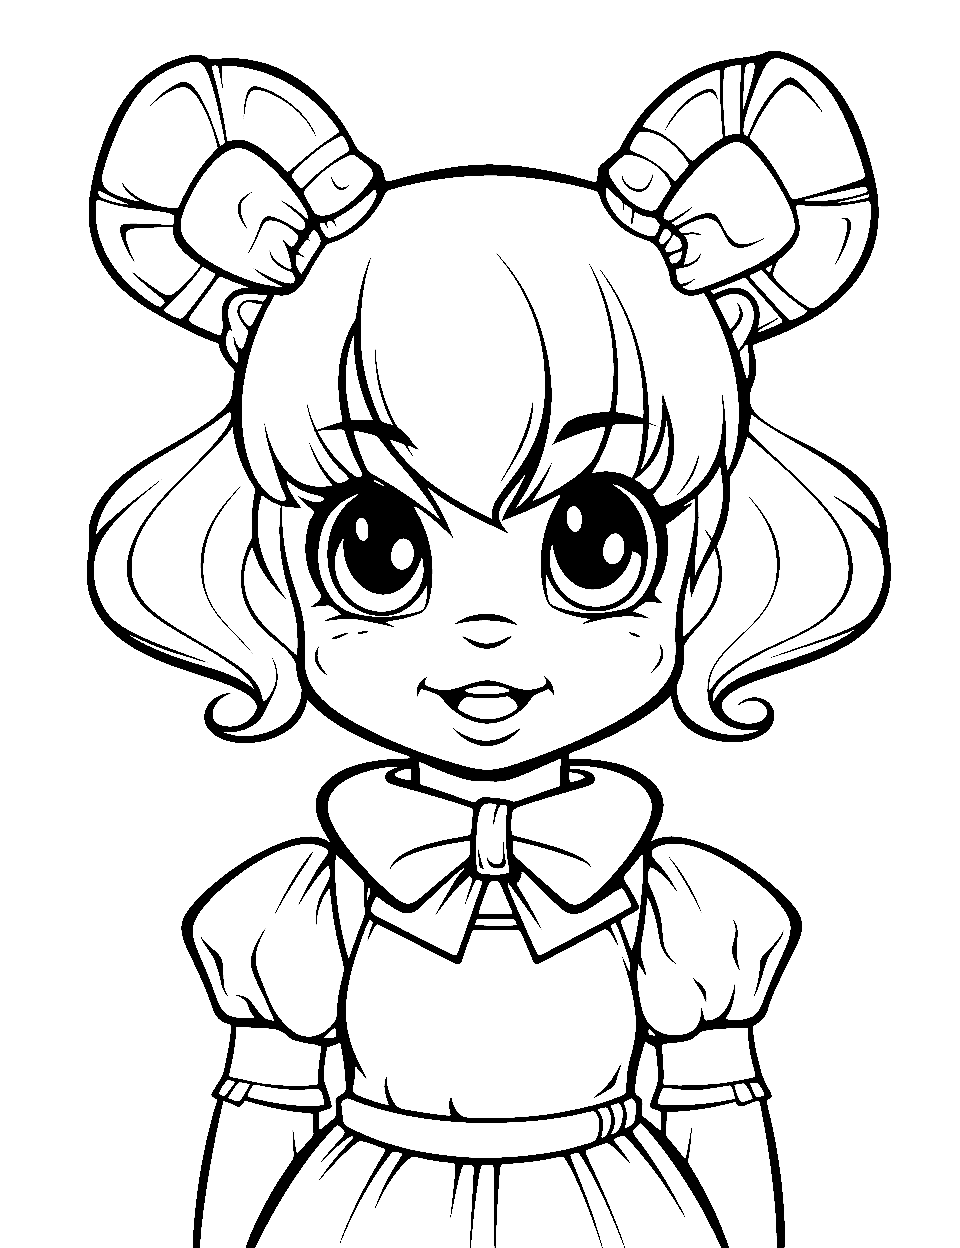 Anime Style Bonnie Five Nights at Freddys Coloring Page - Bonnie represented in a cute anime style.